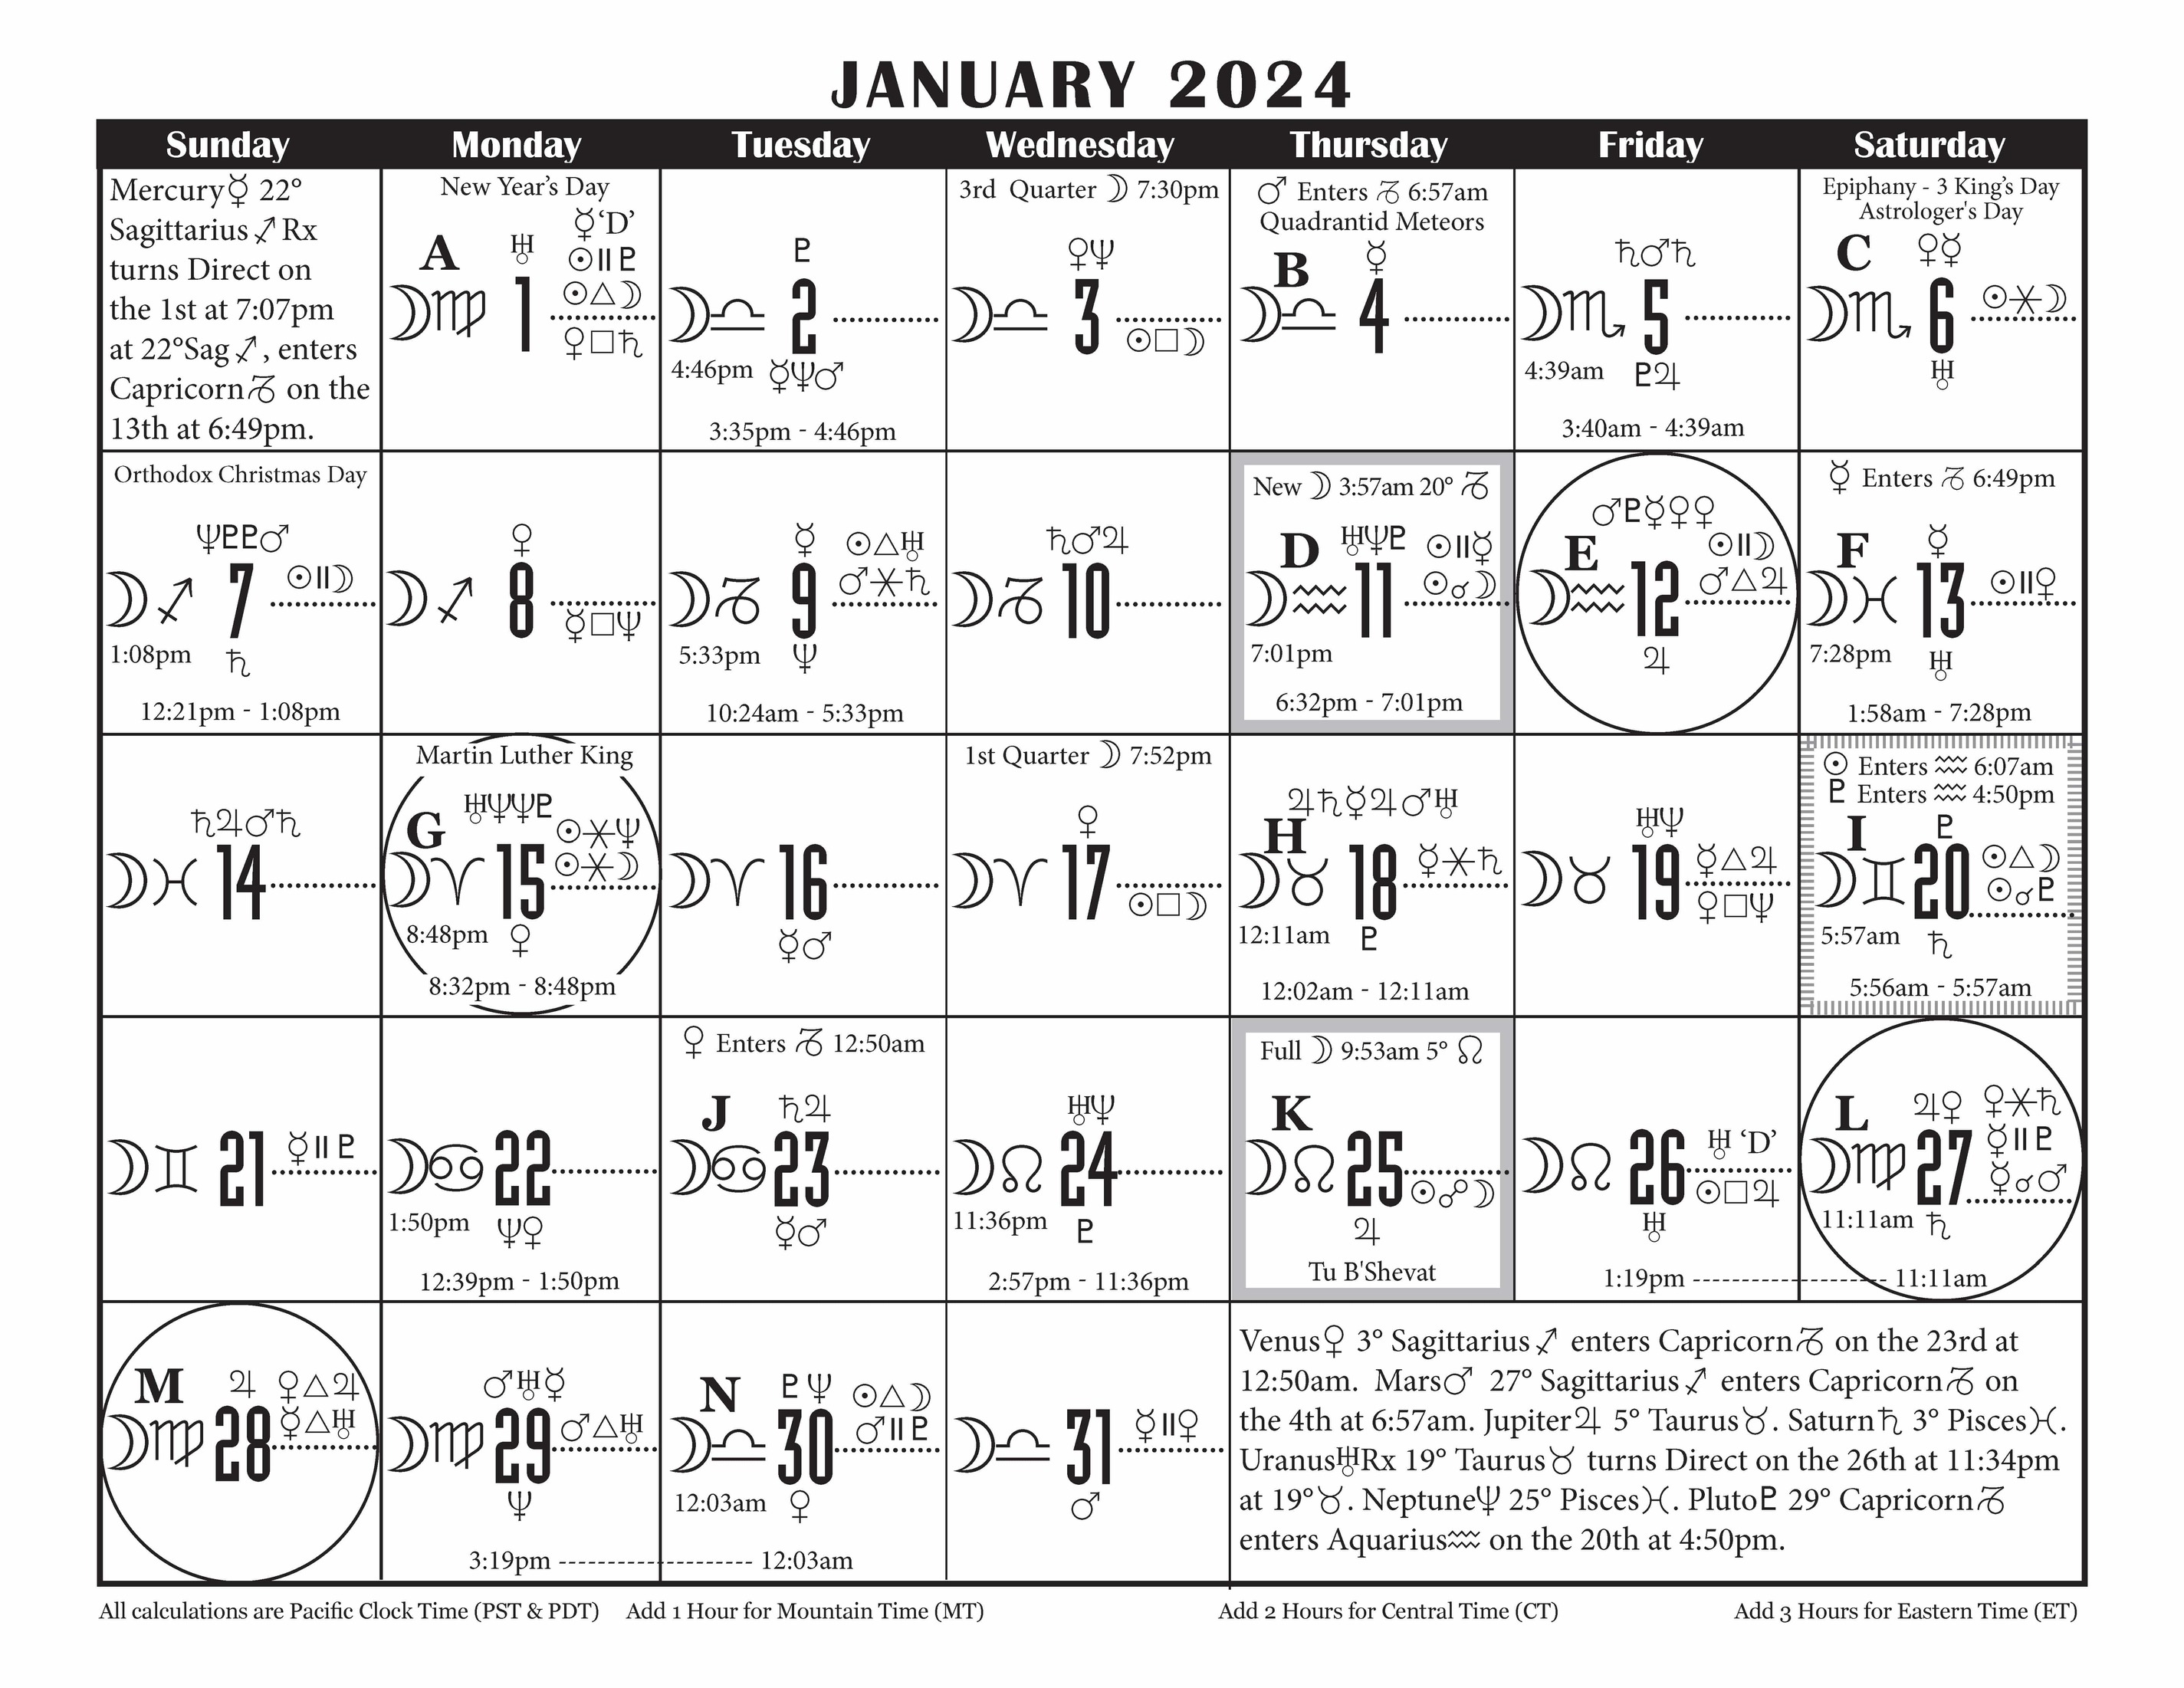 Buy the 2024 Calendar Here in 5 Formats2 Wall Sizes, Mini